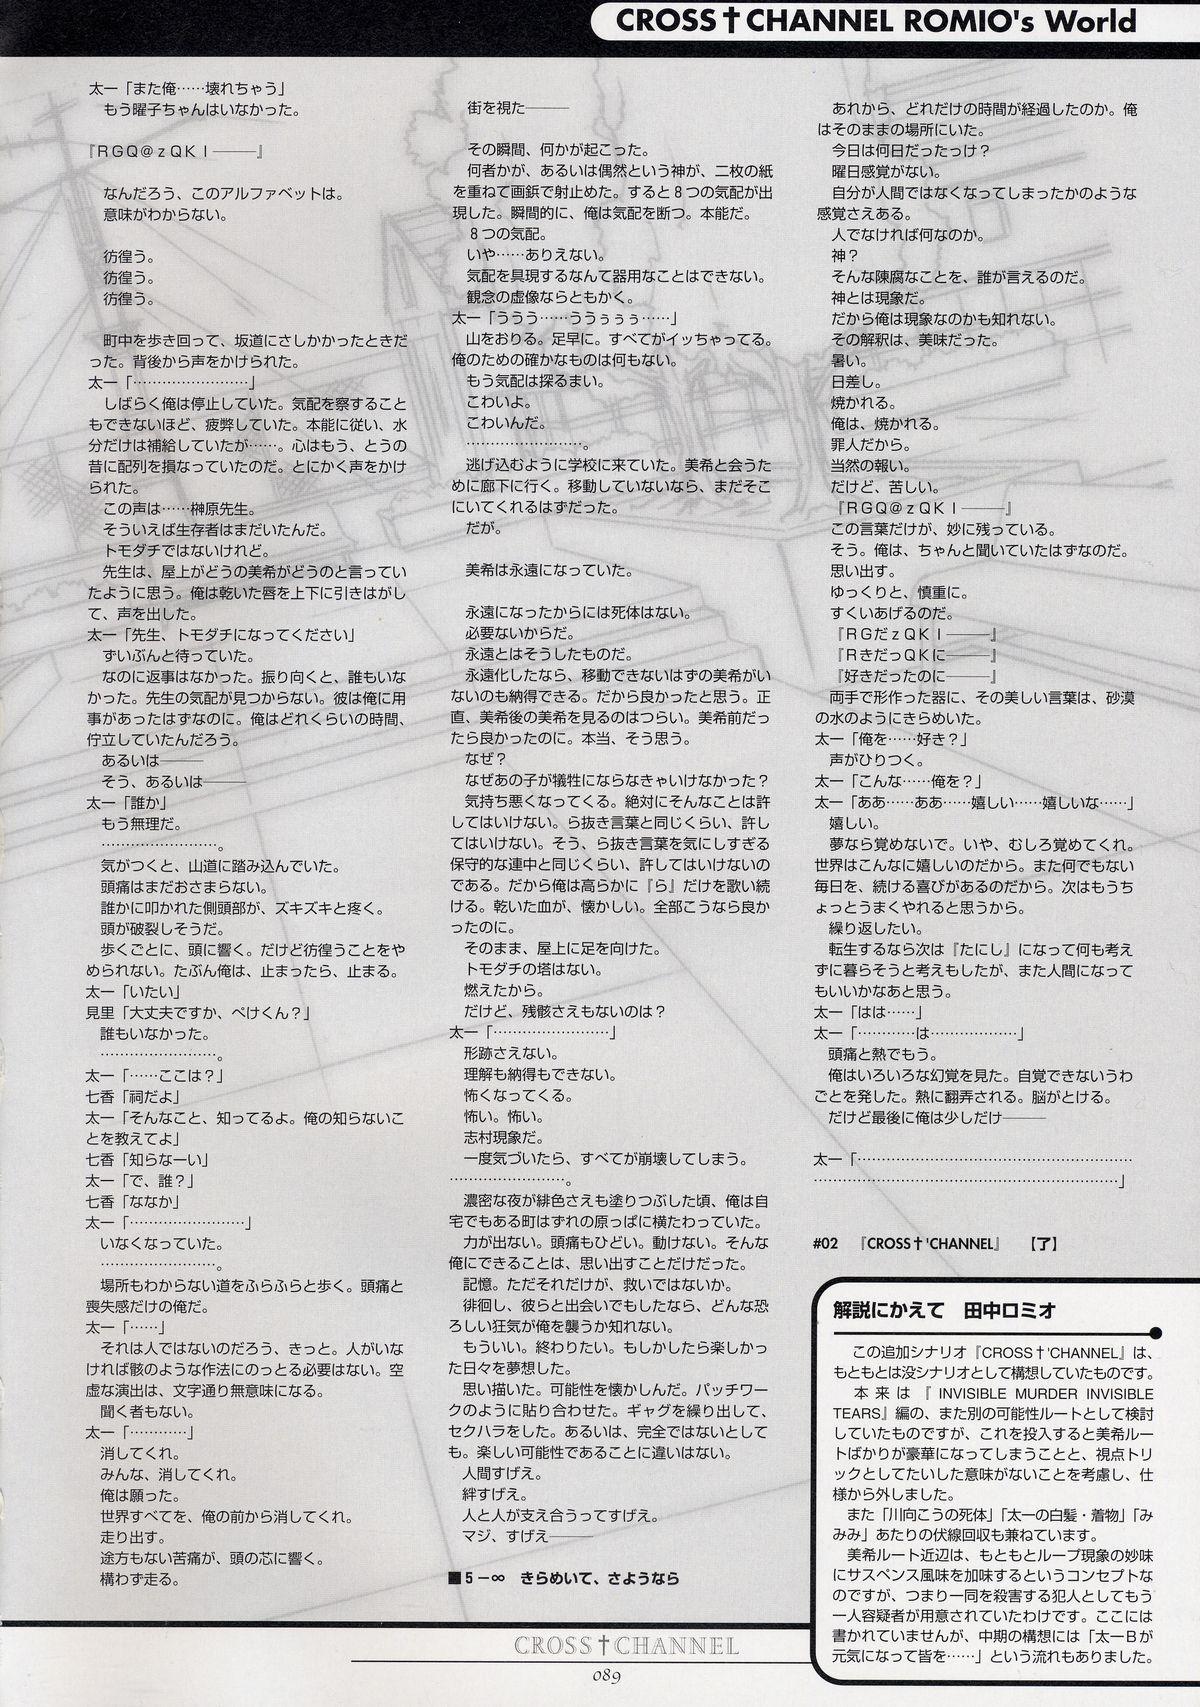 CROSS†CHANNEL Official Setting Materials 99